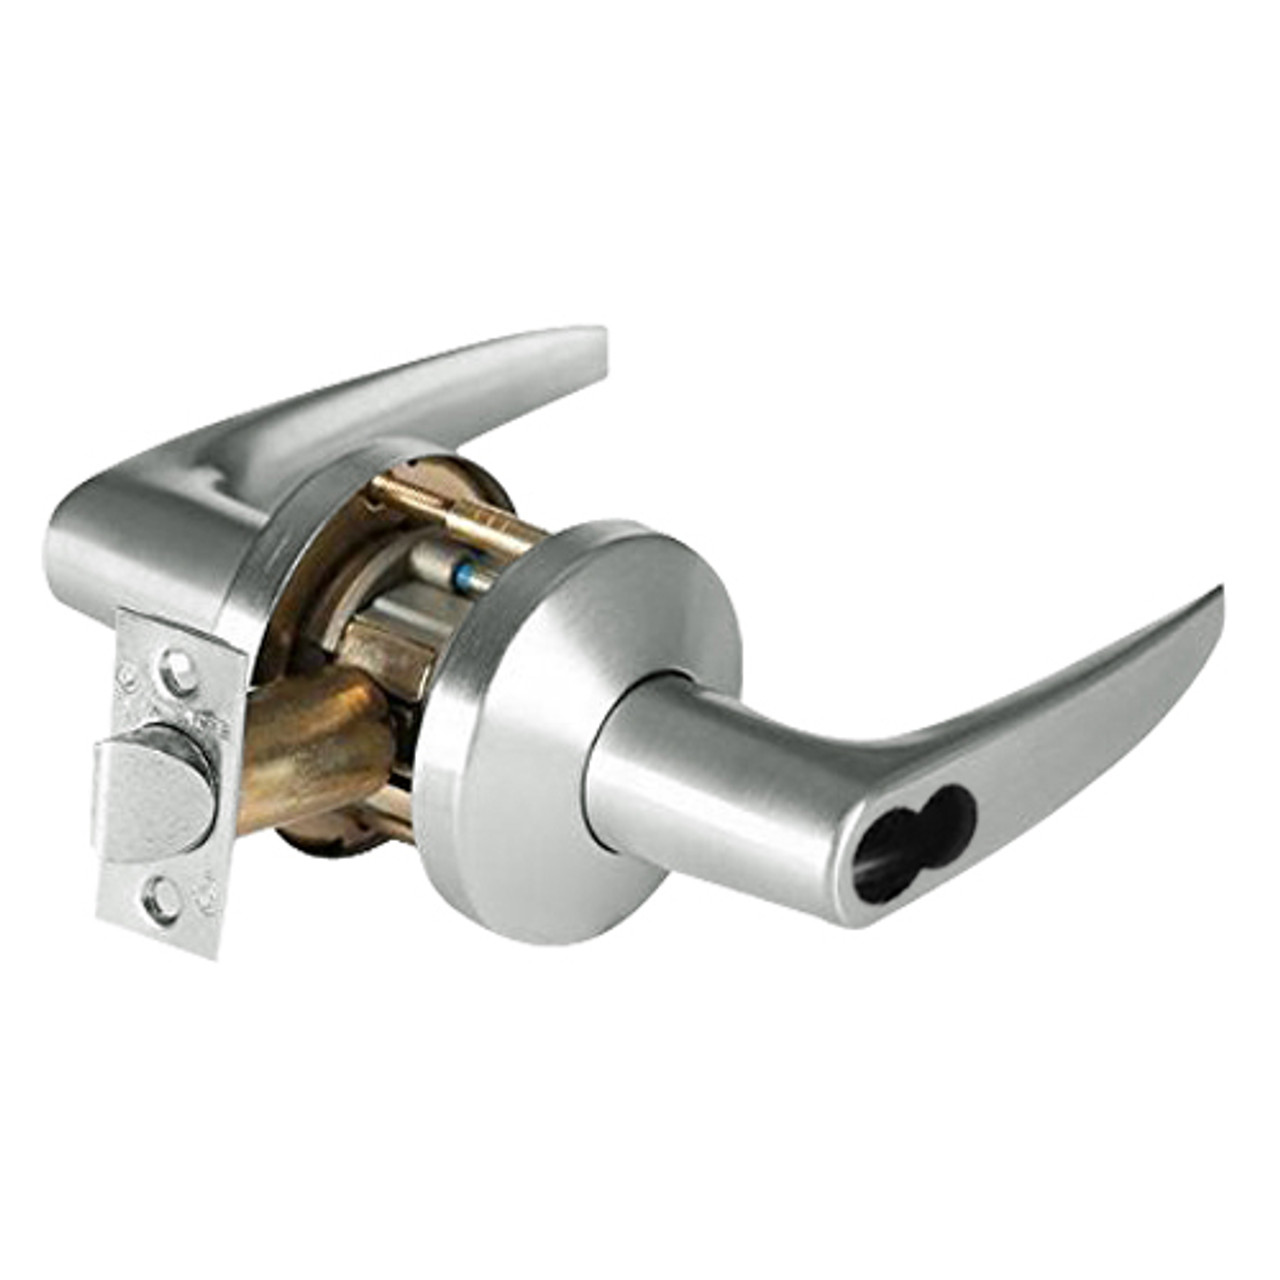 9K37W16KS3618 Best 9K Series Institutional Cylindrical Lever Locks with Curved without Return Lever Design Accept 7 Pin Best Core in Bright Nickel